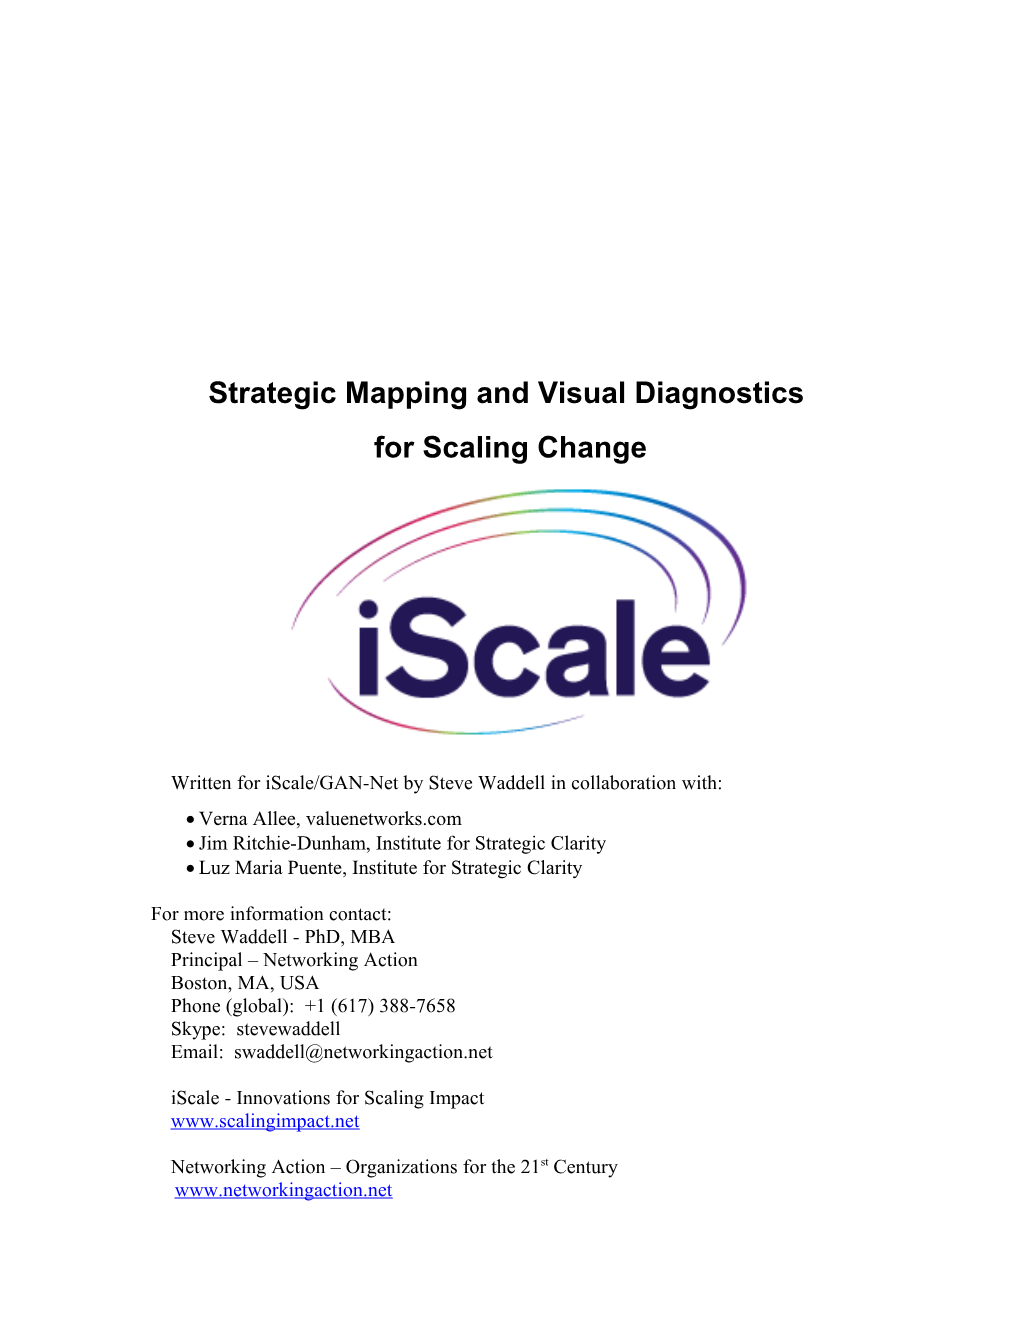 Iscale: Mapping for Scaling Change